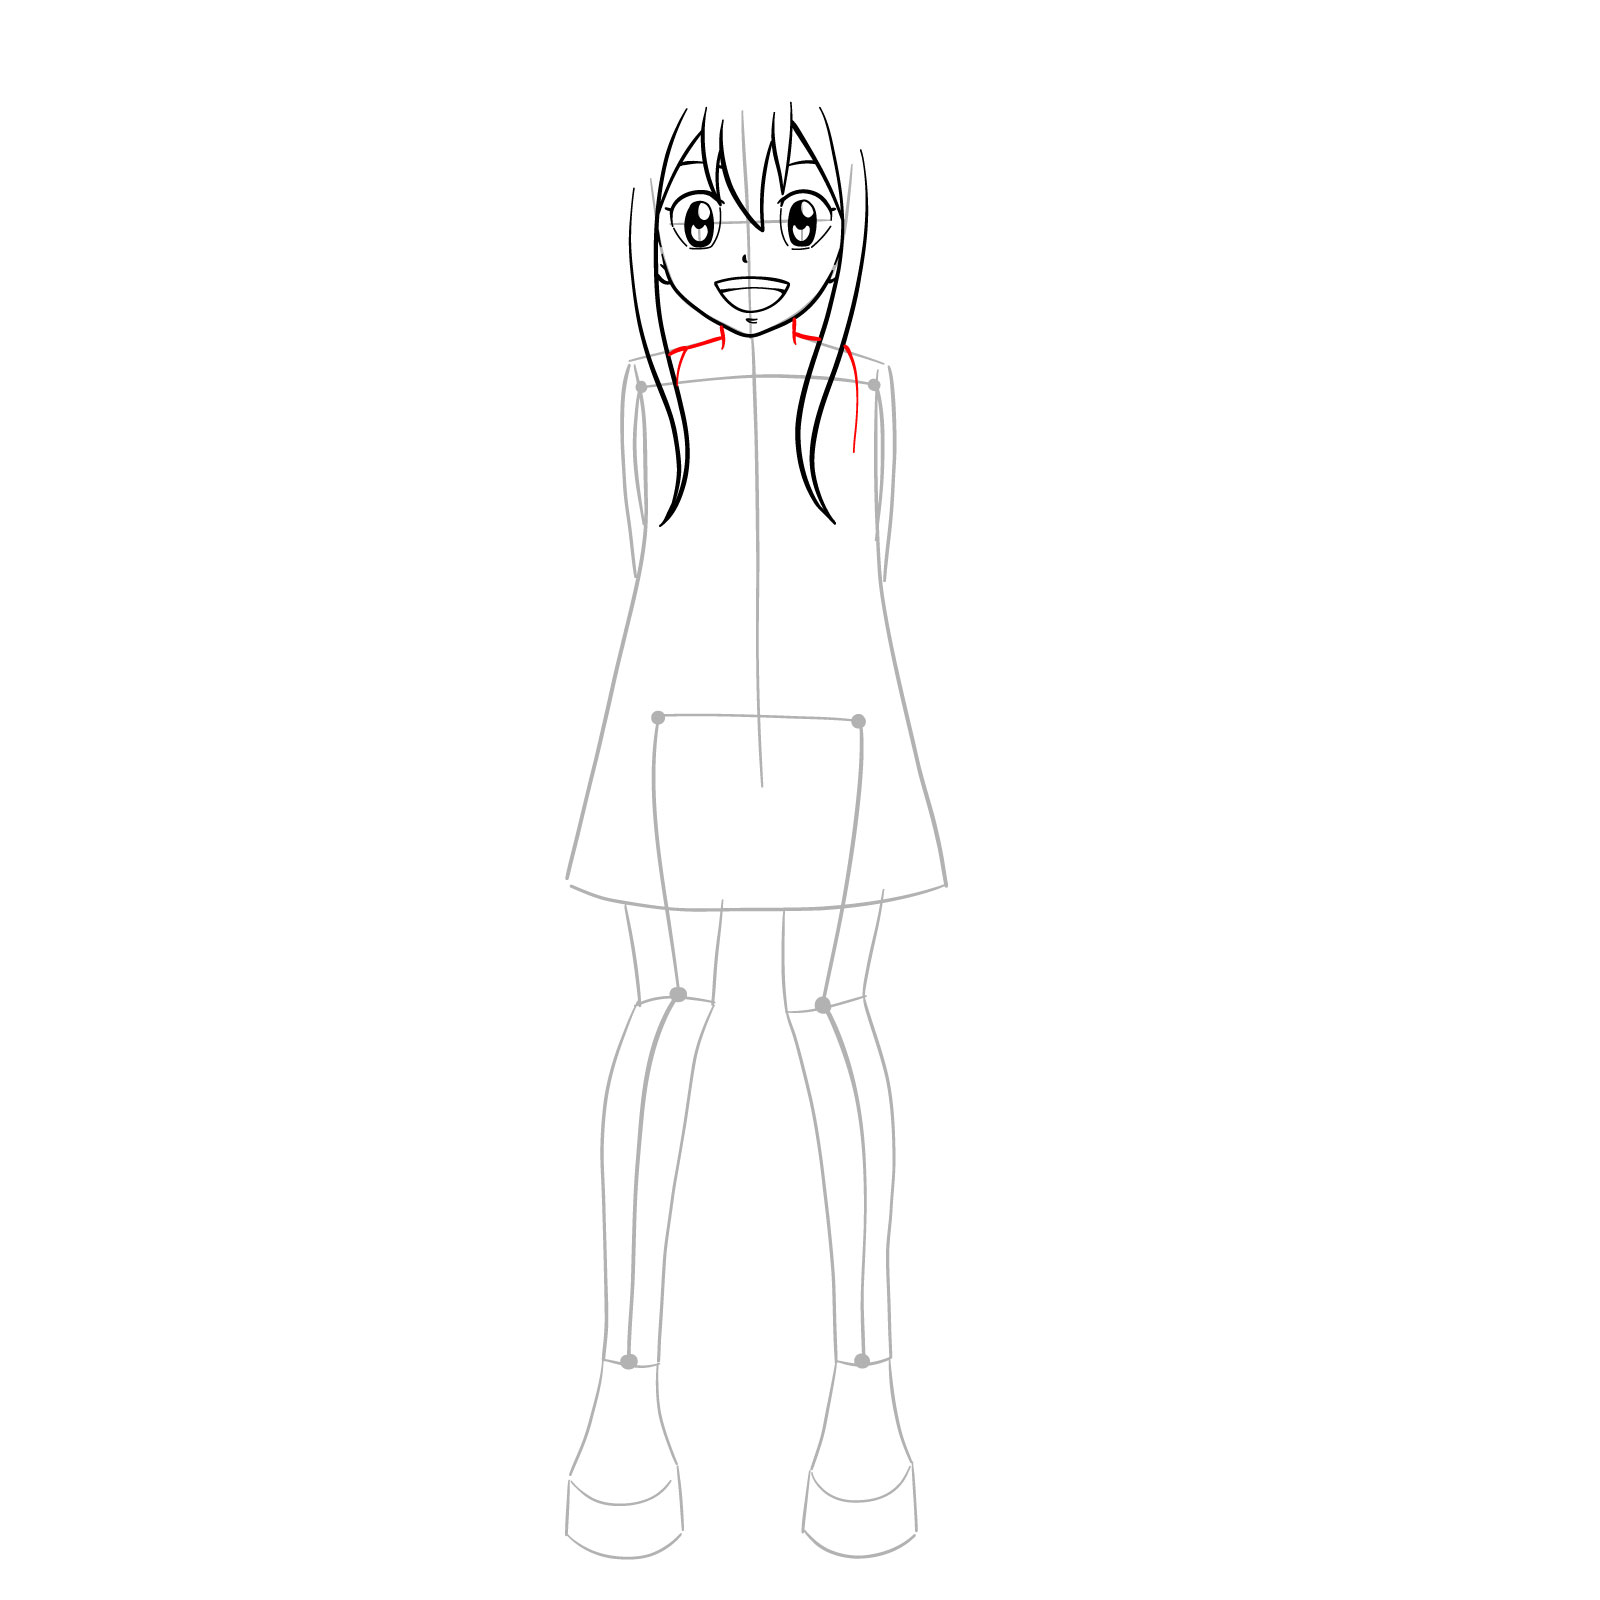 How to draw Wendy Marvell from Fairy Tail - step 09